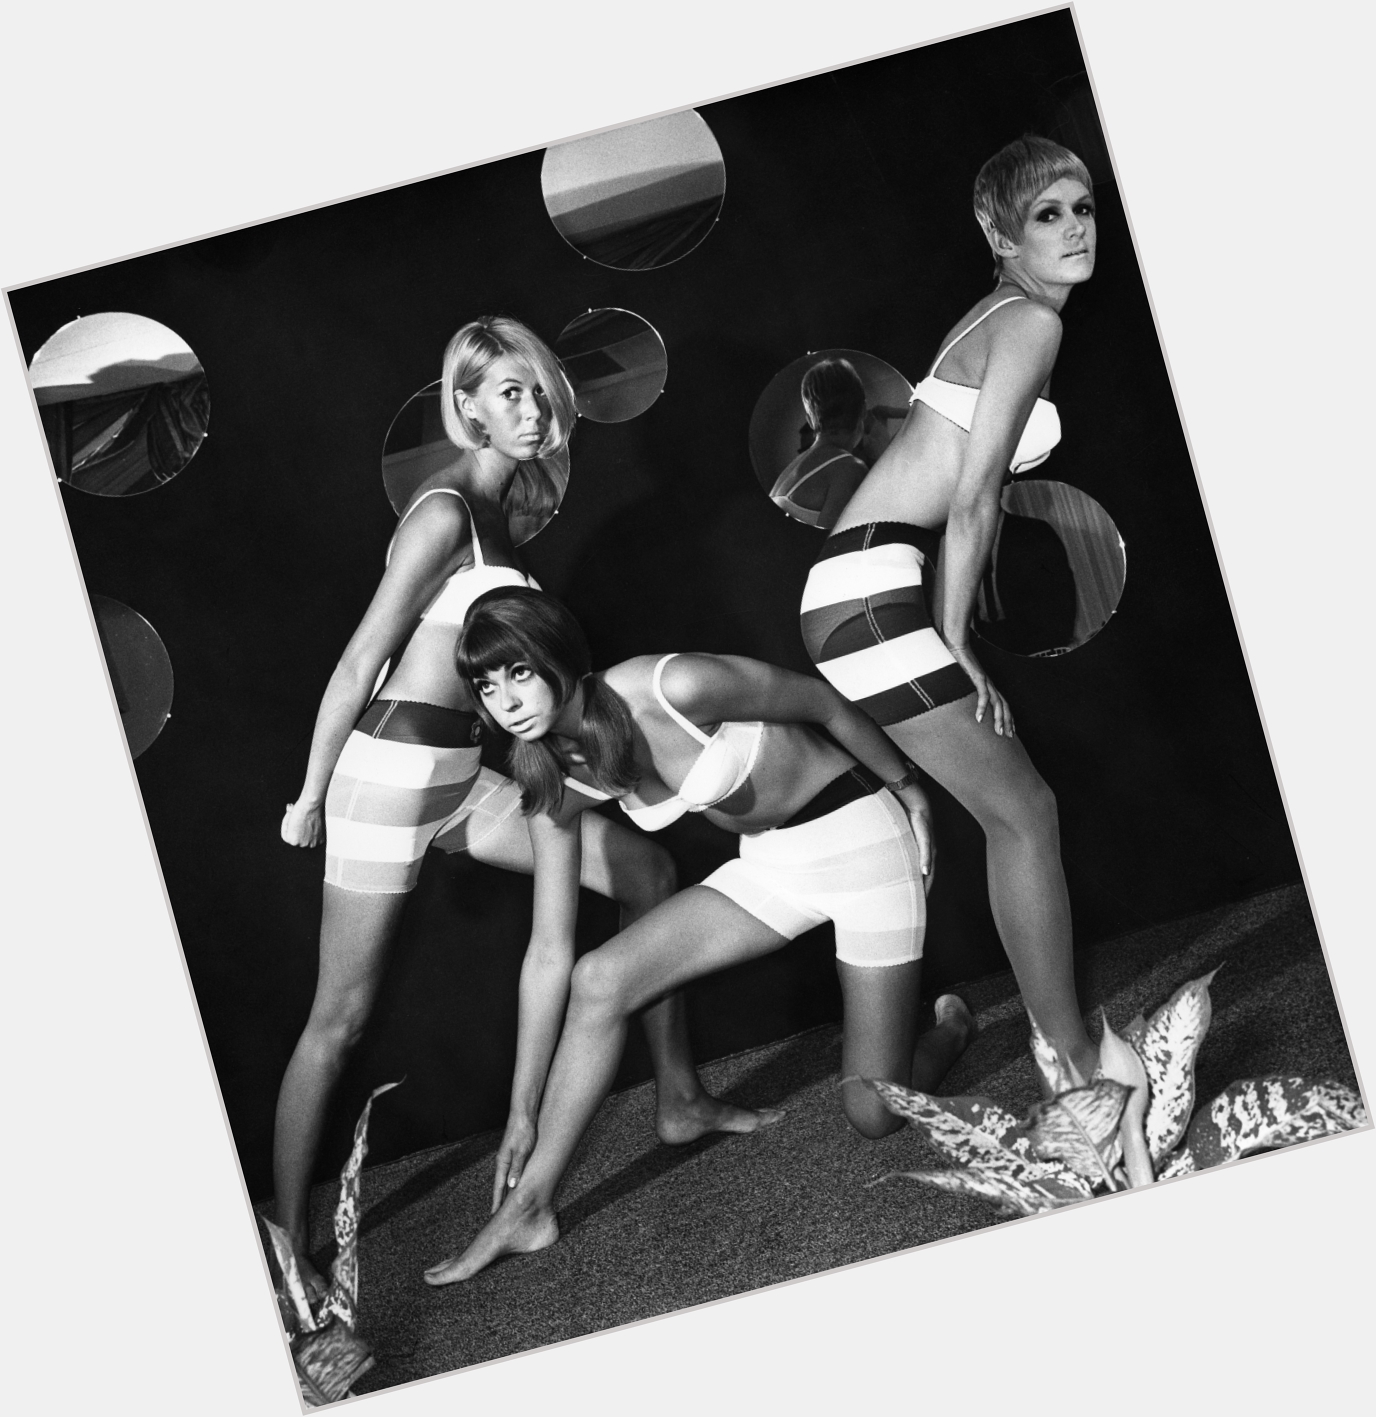 Https://fanpagepress.net/m/M/Mary Quant Exclusive Hot Pic 5